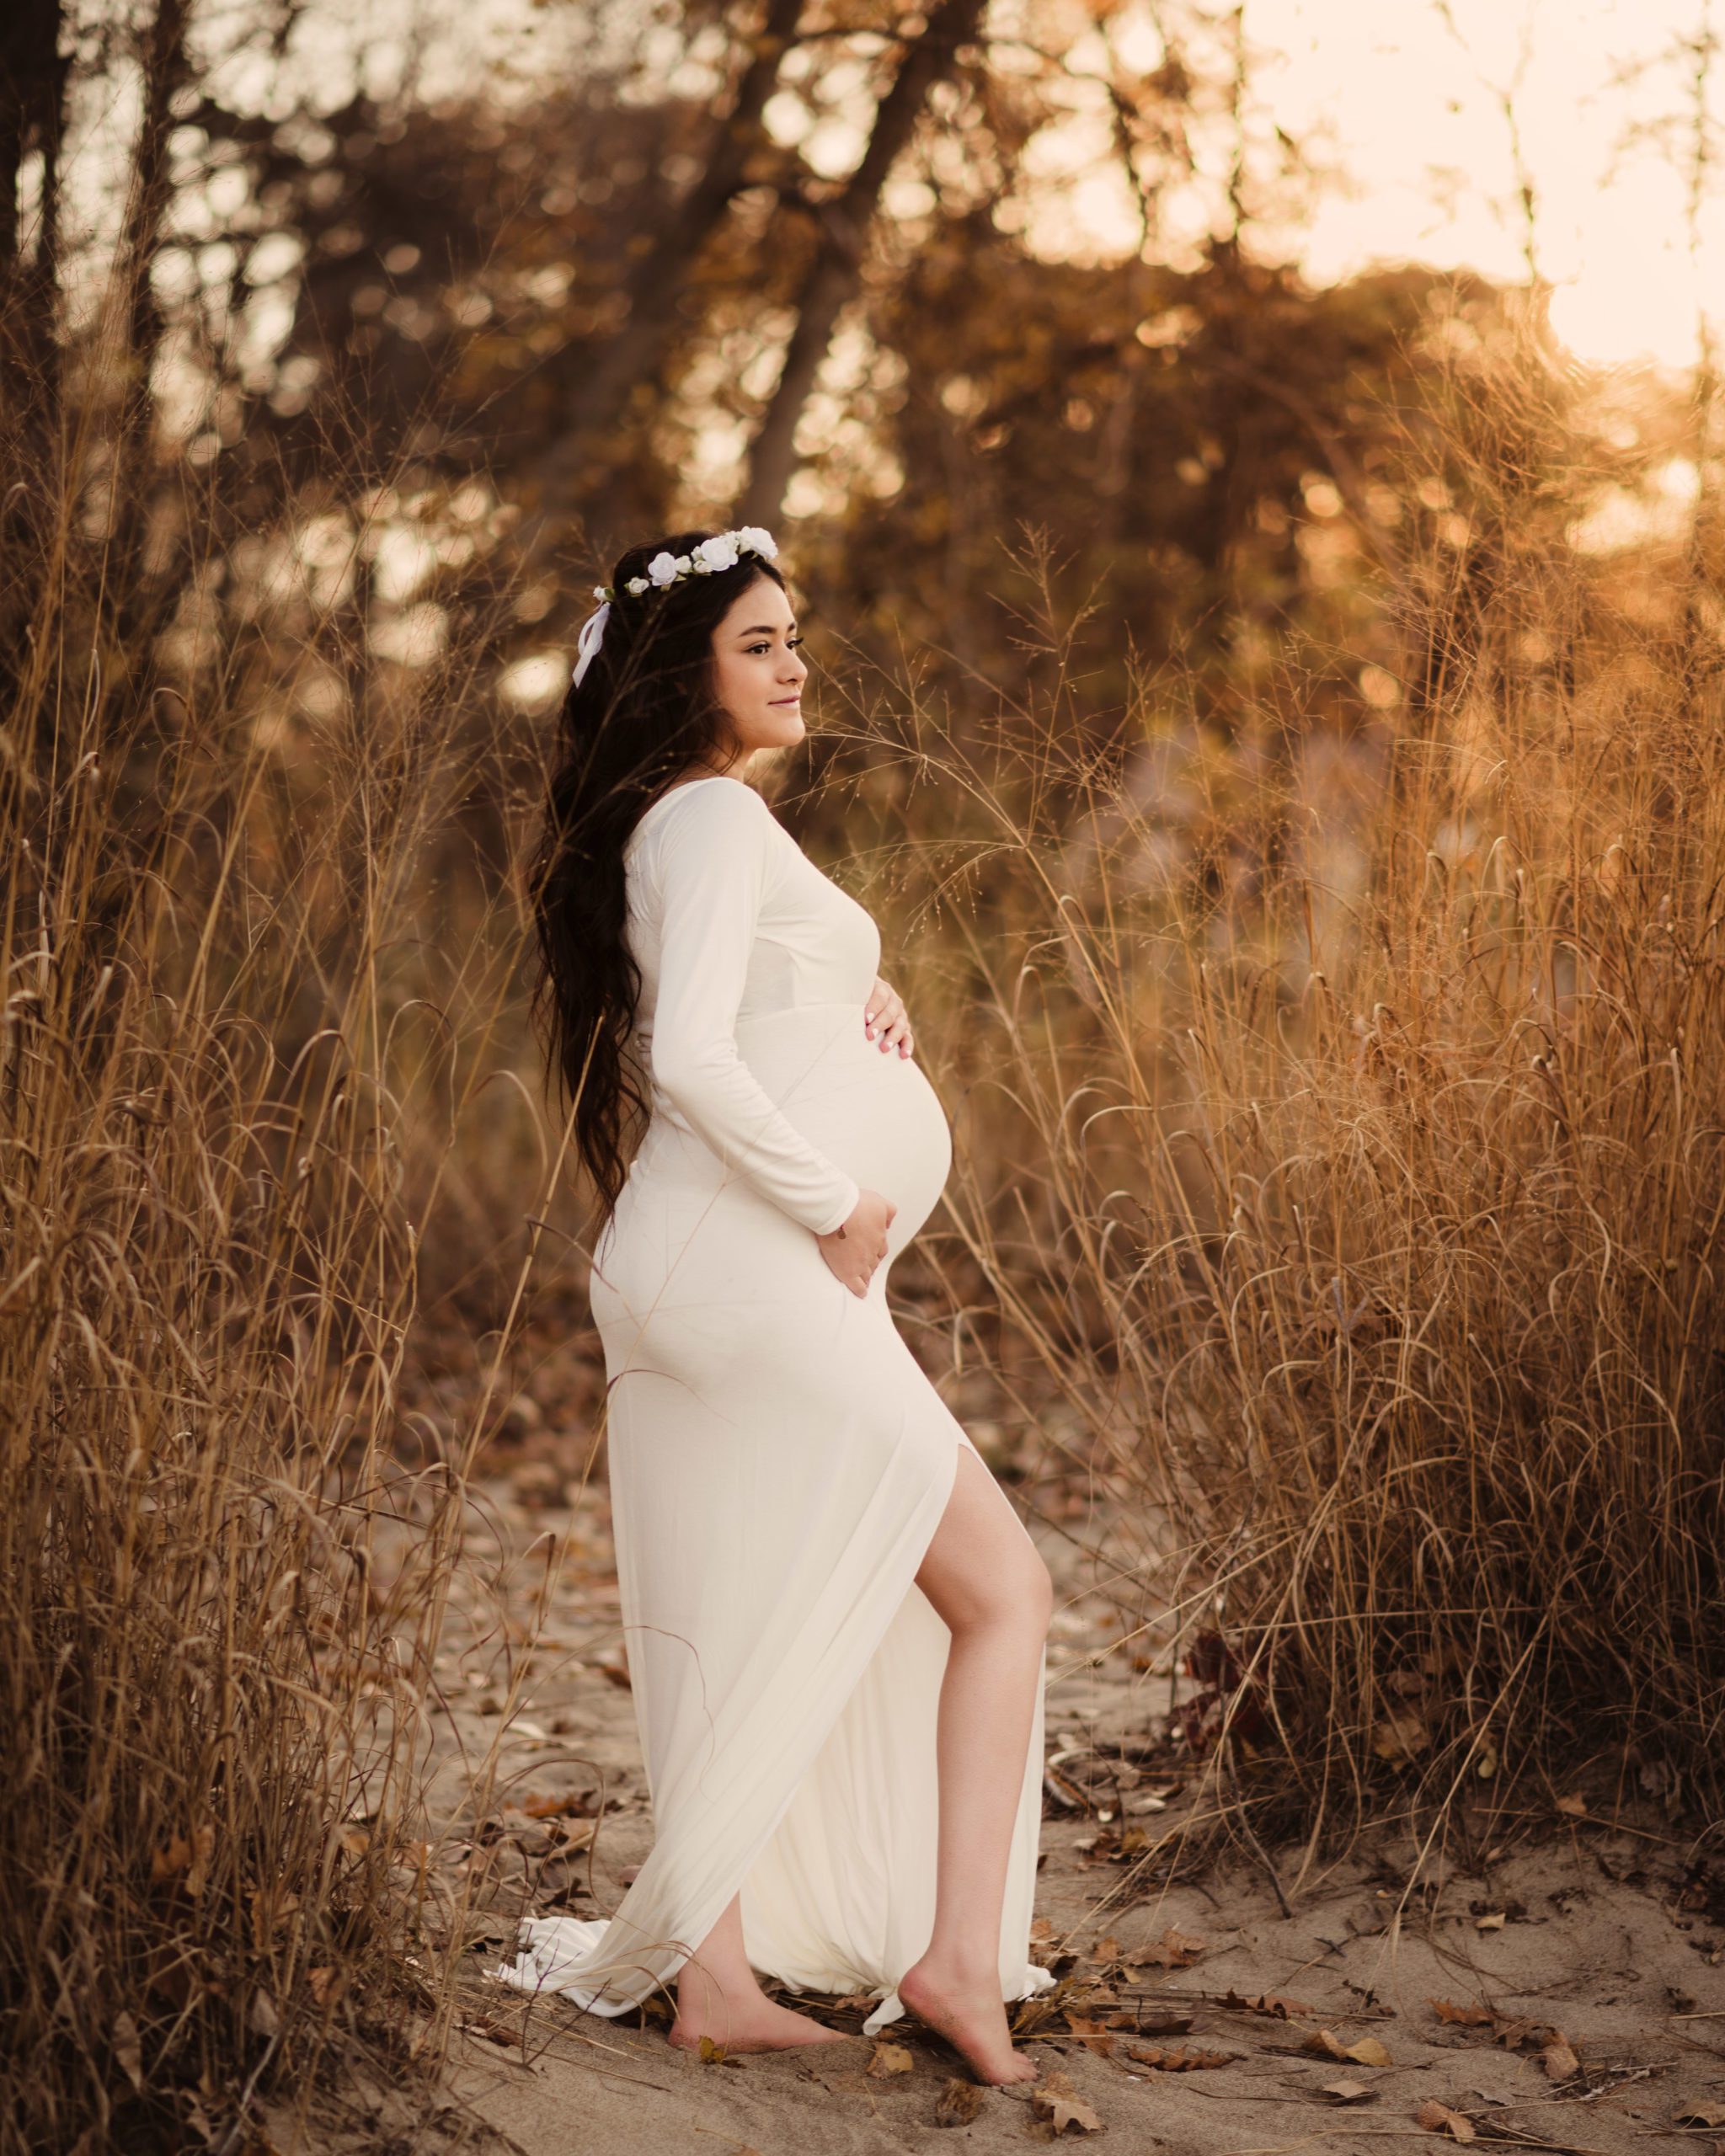 Maternity photo session in Presque isle in Erie Pennsylvania by Maria from Maria Angeles Photography